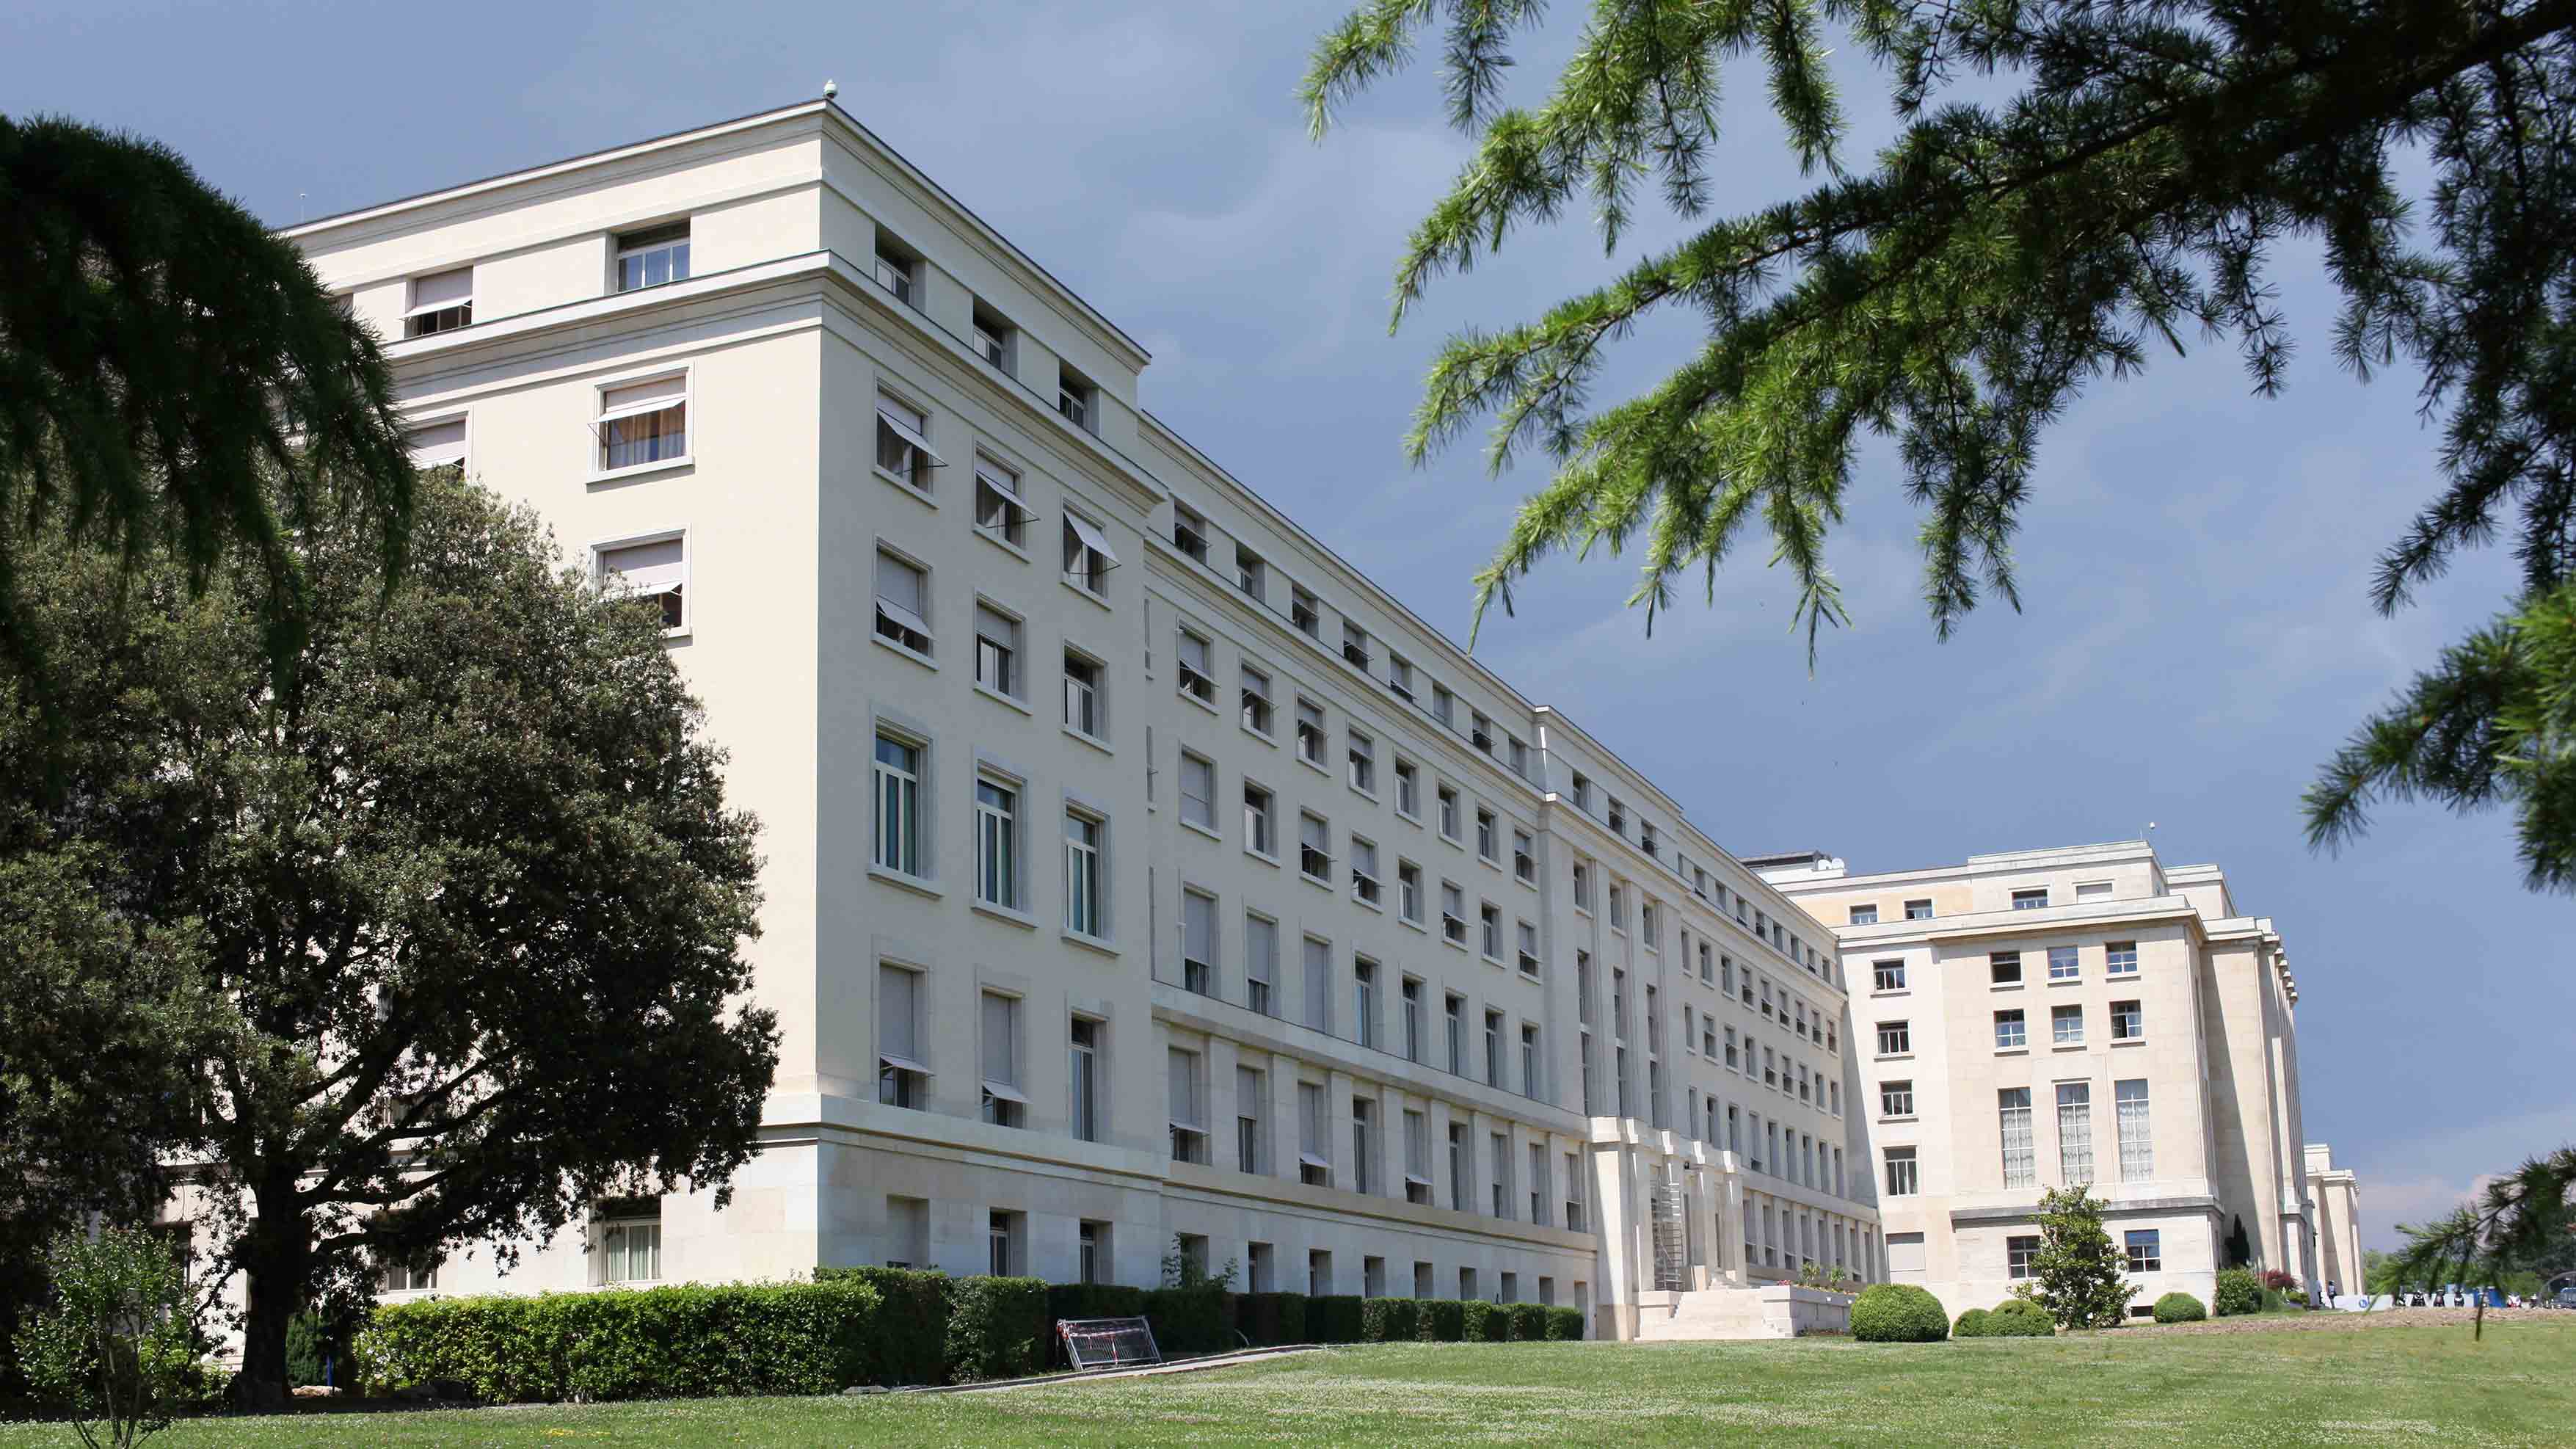 Palais des nations main building with steel windows